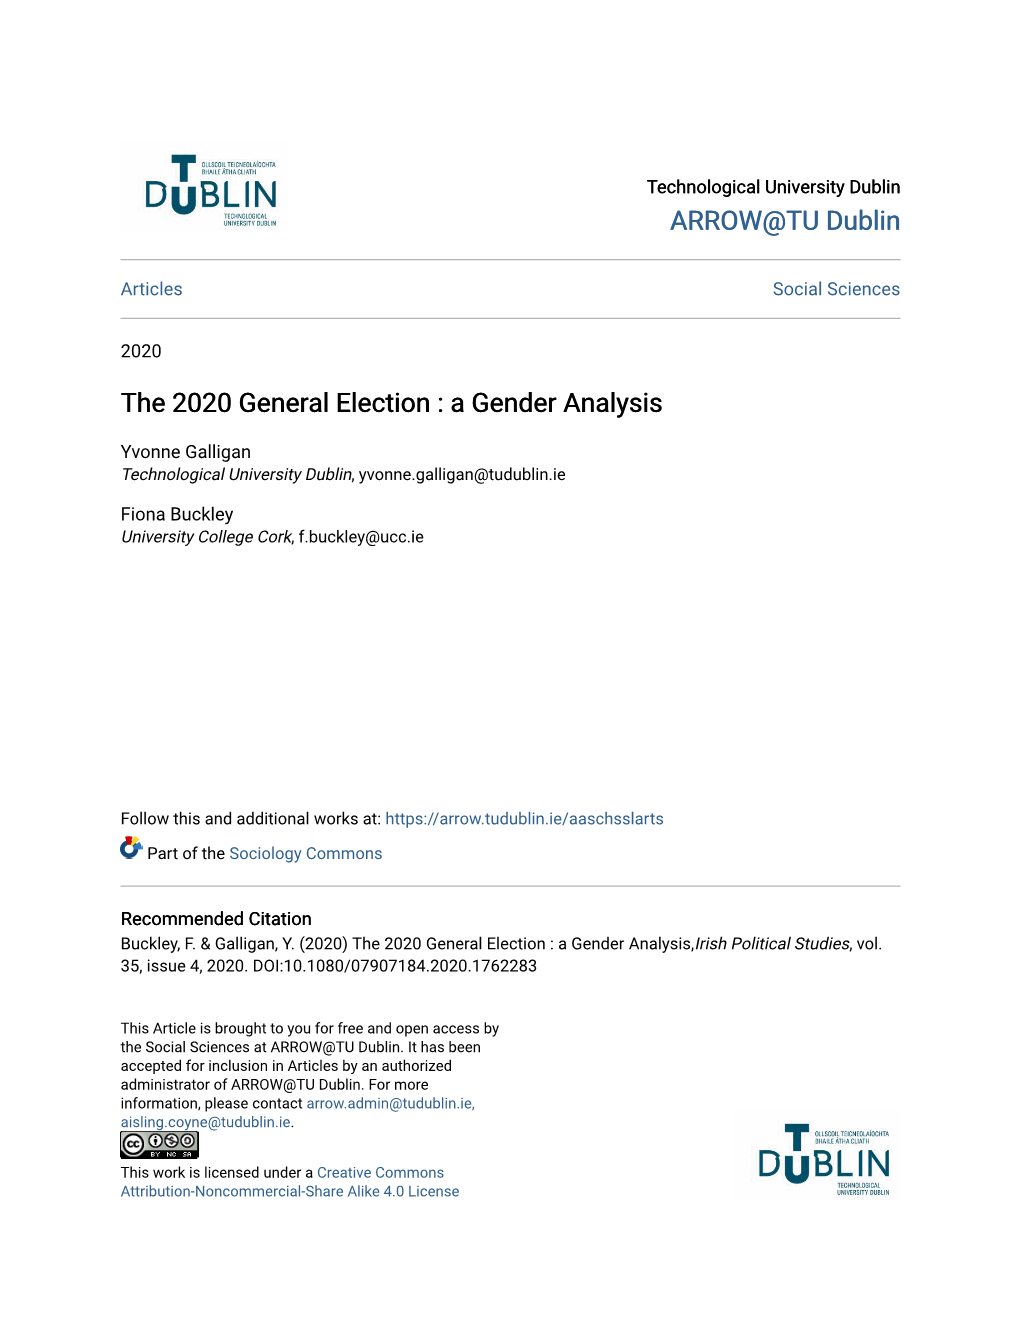 The 2020 General Election : a Gender Analysis